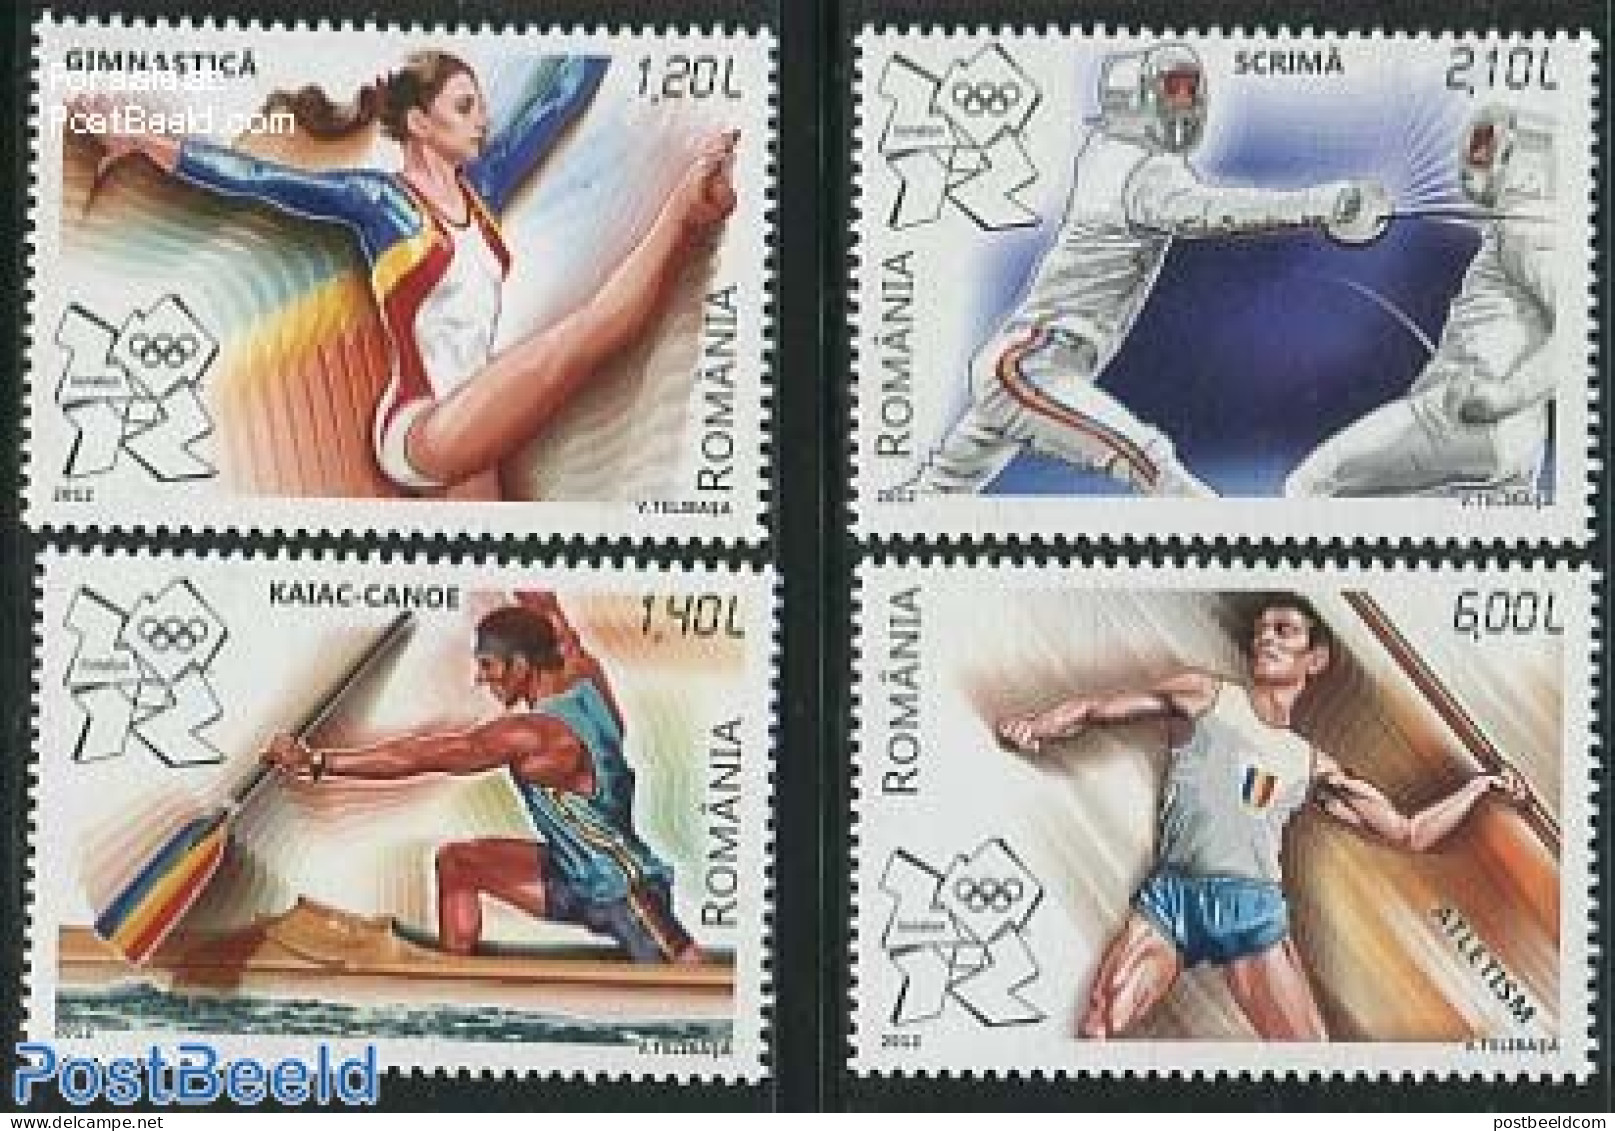 Romania 2012 Olympic Games London 4v, Mint NH, Sport - Athletics - Fencing - Kayaks & Rowing - Olympic Games - Neufs